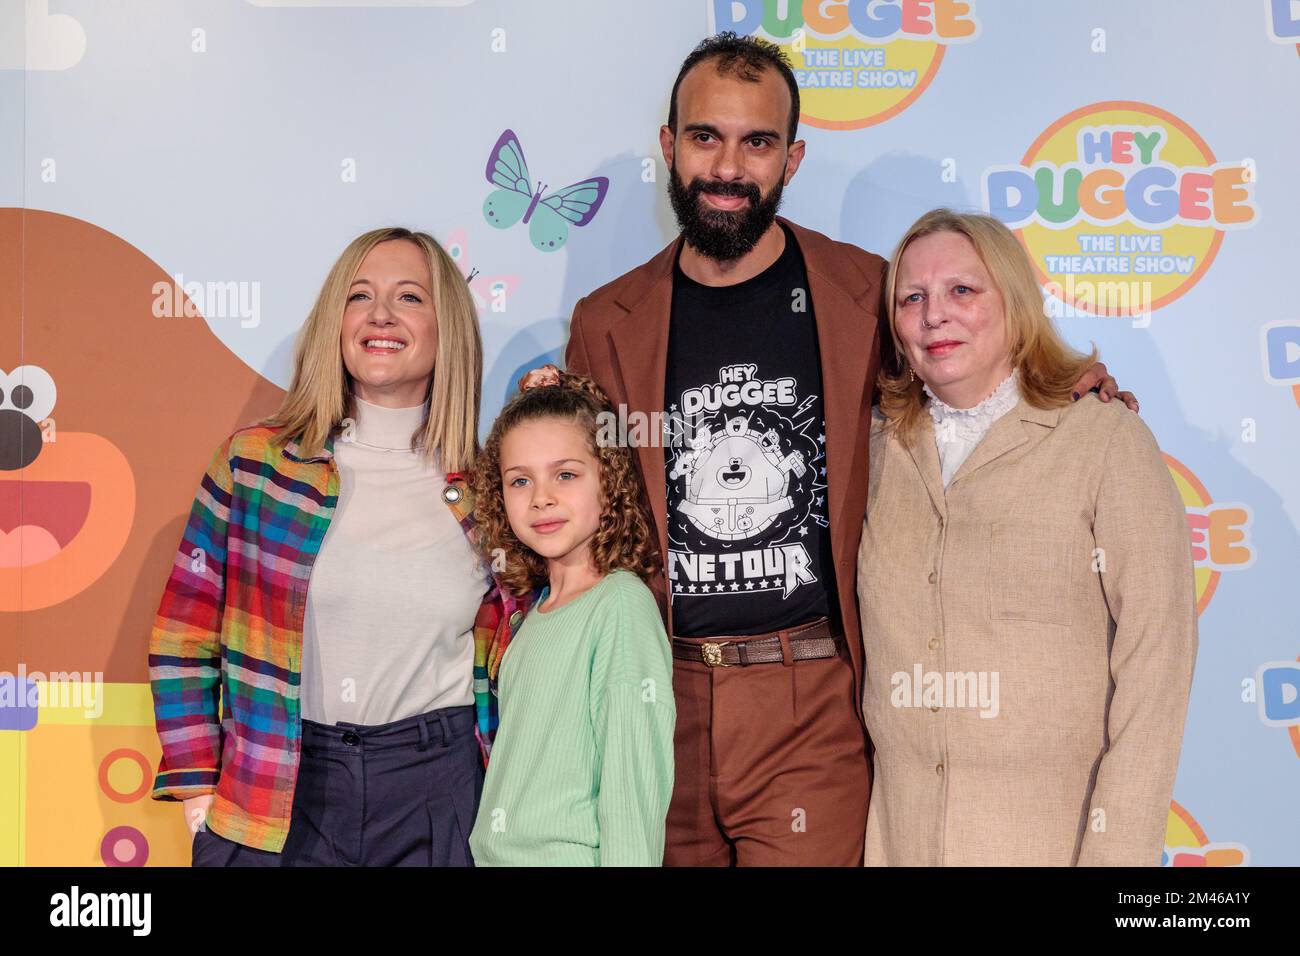 Co-adapter of Hey Duggee Live, Matthew Xia, arriving at The Royal Festival Hall for the press performance. Photo by Amanda Rose/Alamy Stock Photo